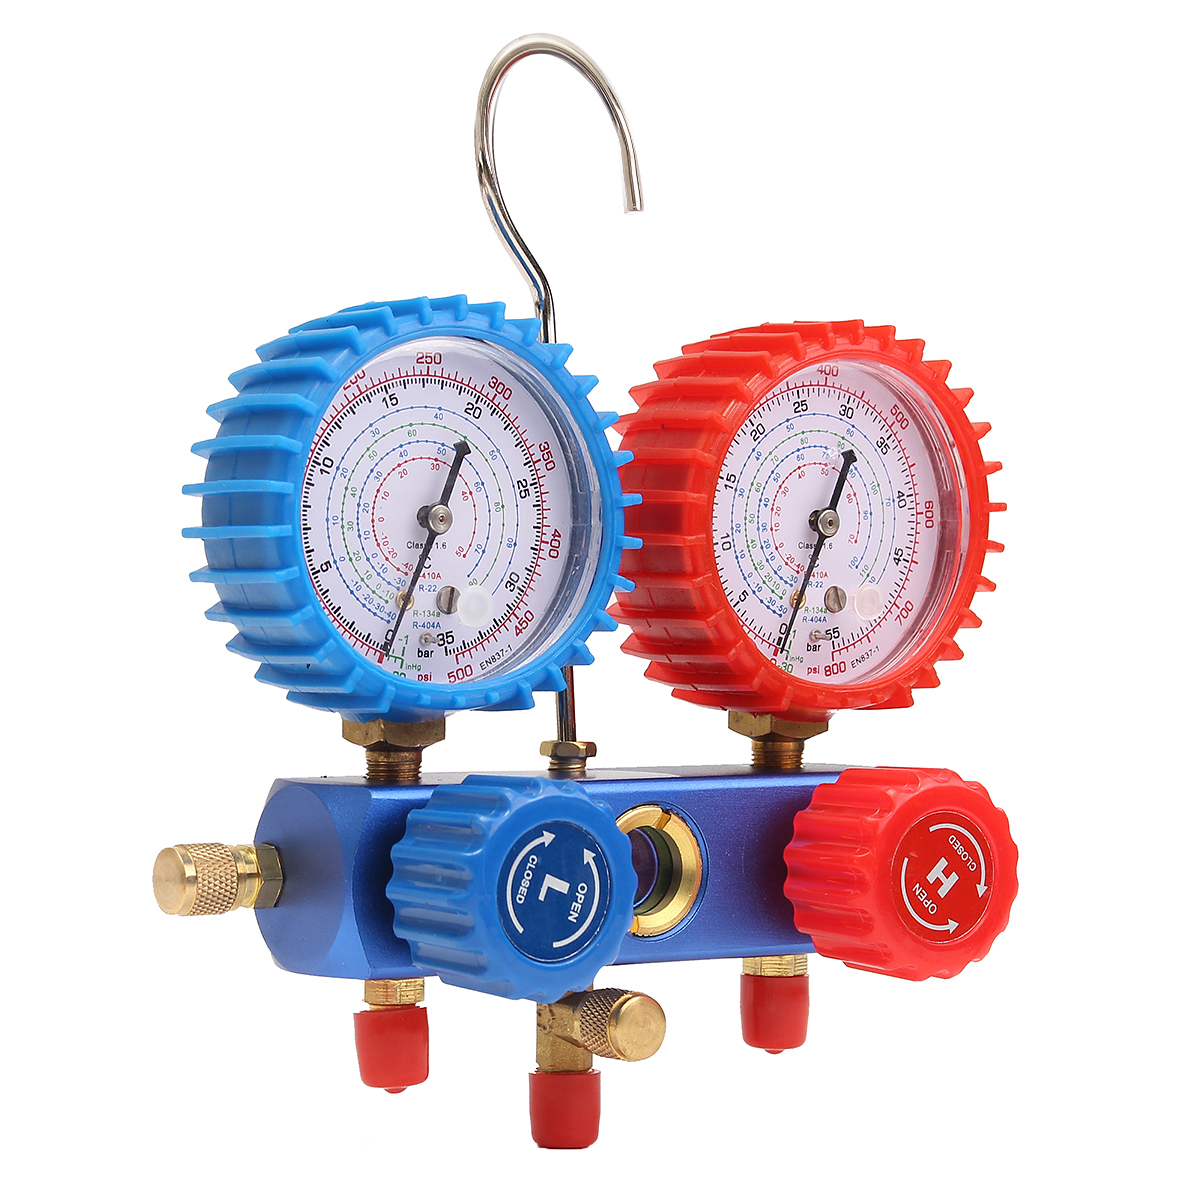 AC-Refrigerant-Manifold-Gauge-Set-Air-Conditioning-Tools-with-Hose-and-Hook-for-Air-Condition-1545648-3